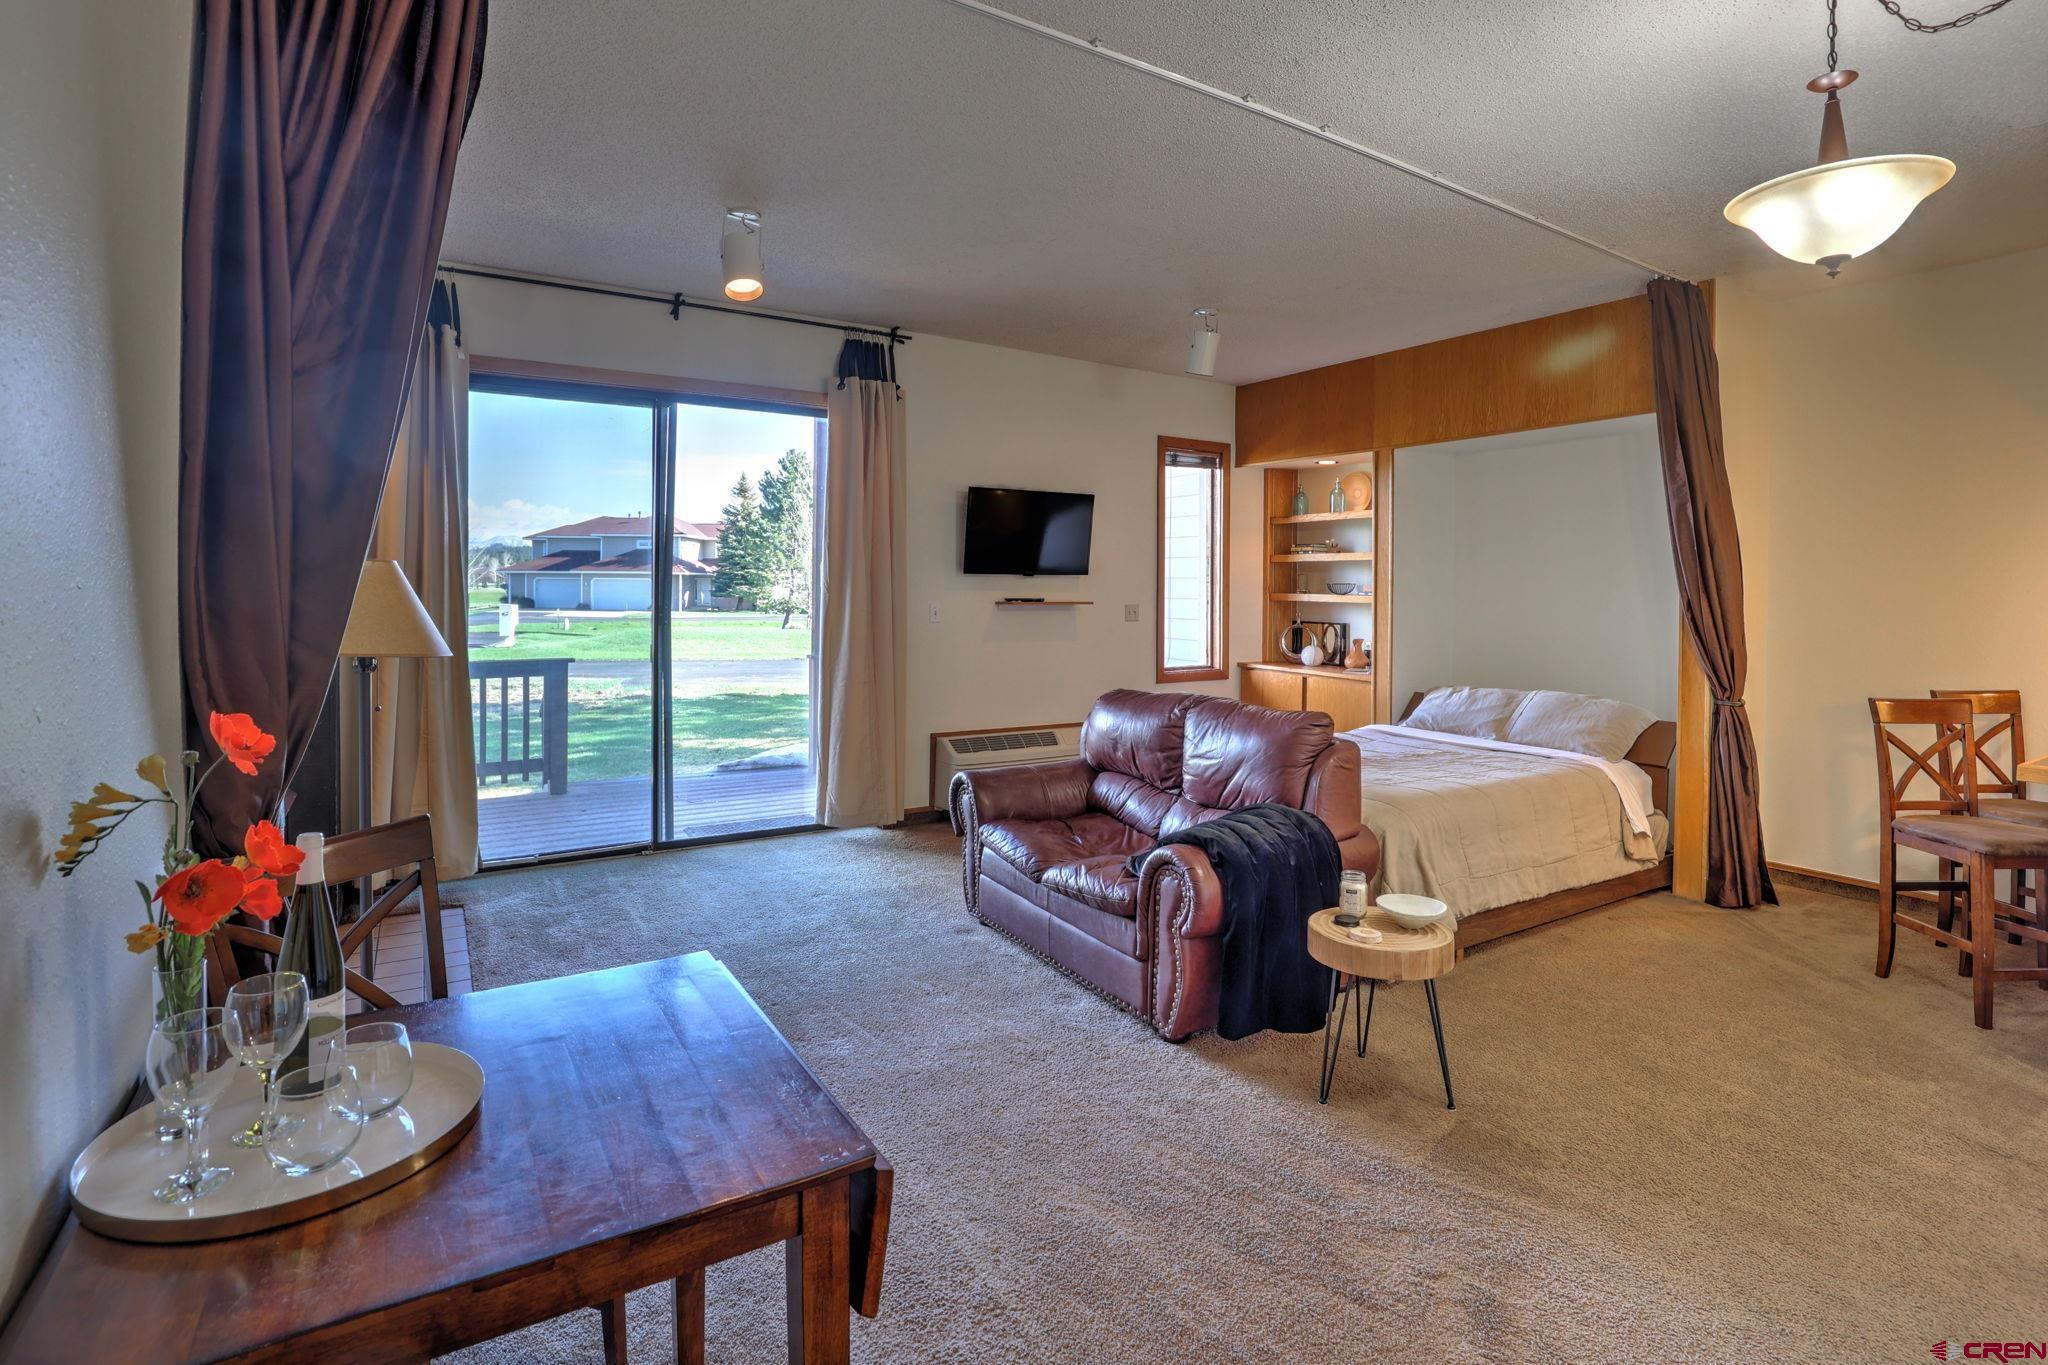 89 Valley View Drive, #3191, Pagosa Springs, CO 81147 Listing Photo  1